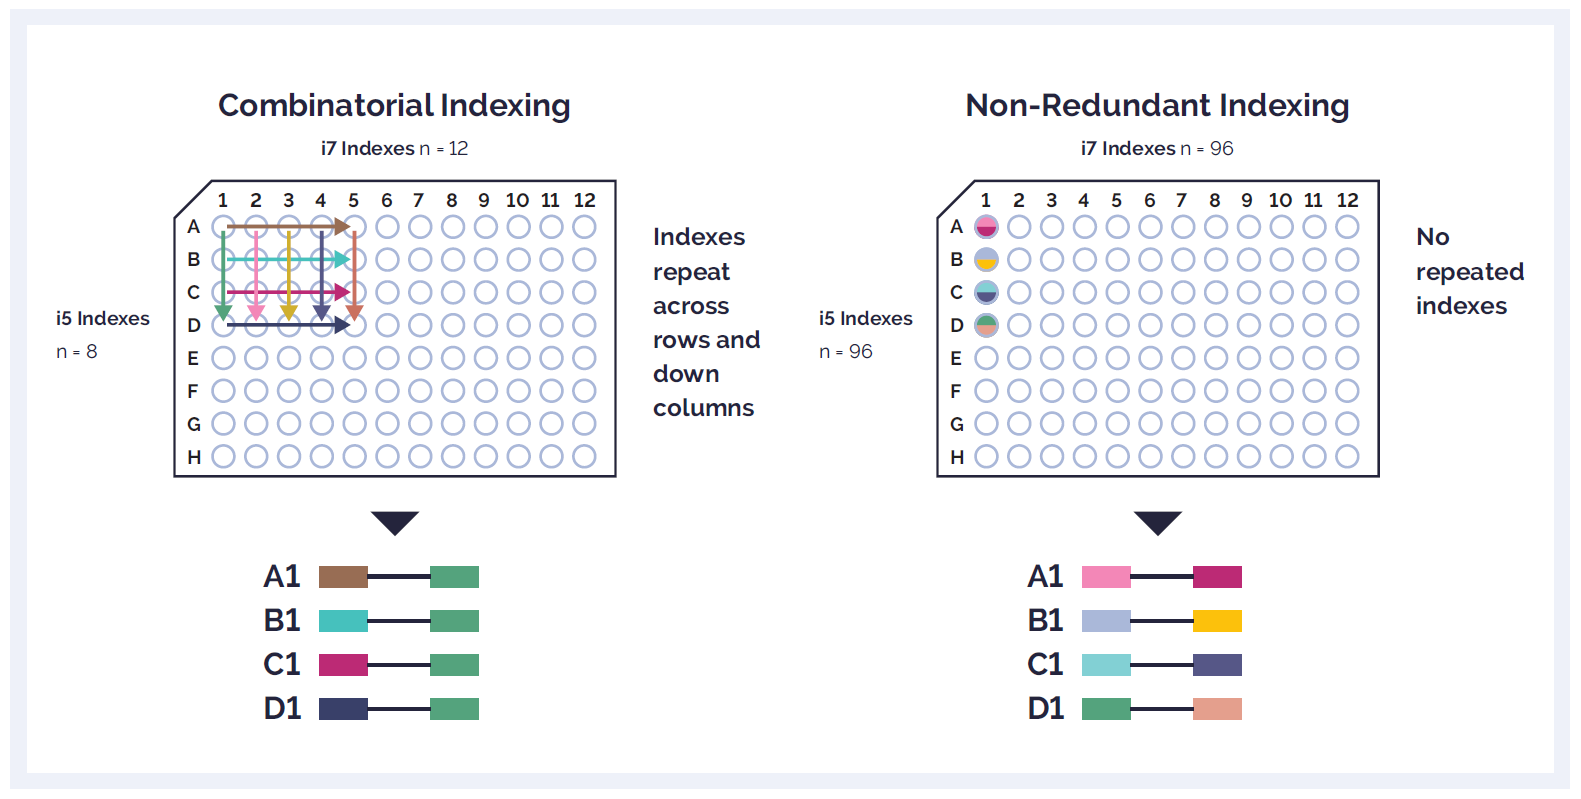 Combinatorial indexing vs. non redundant indexing to prepare sequencing libraries